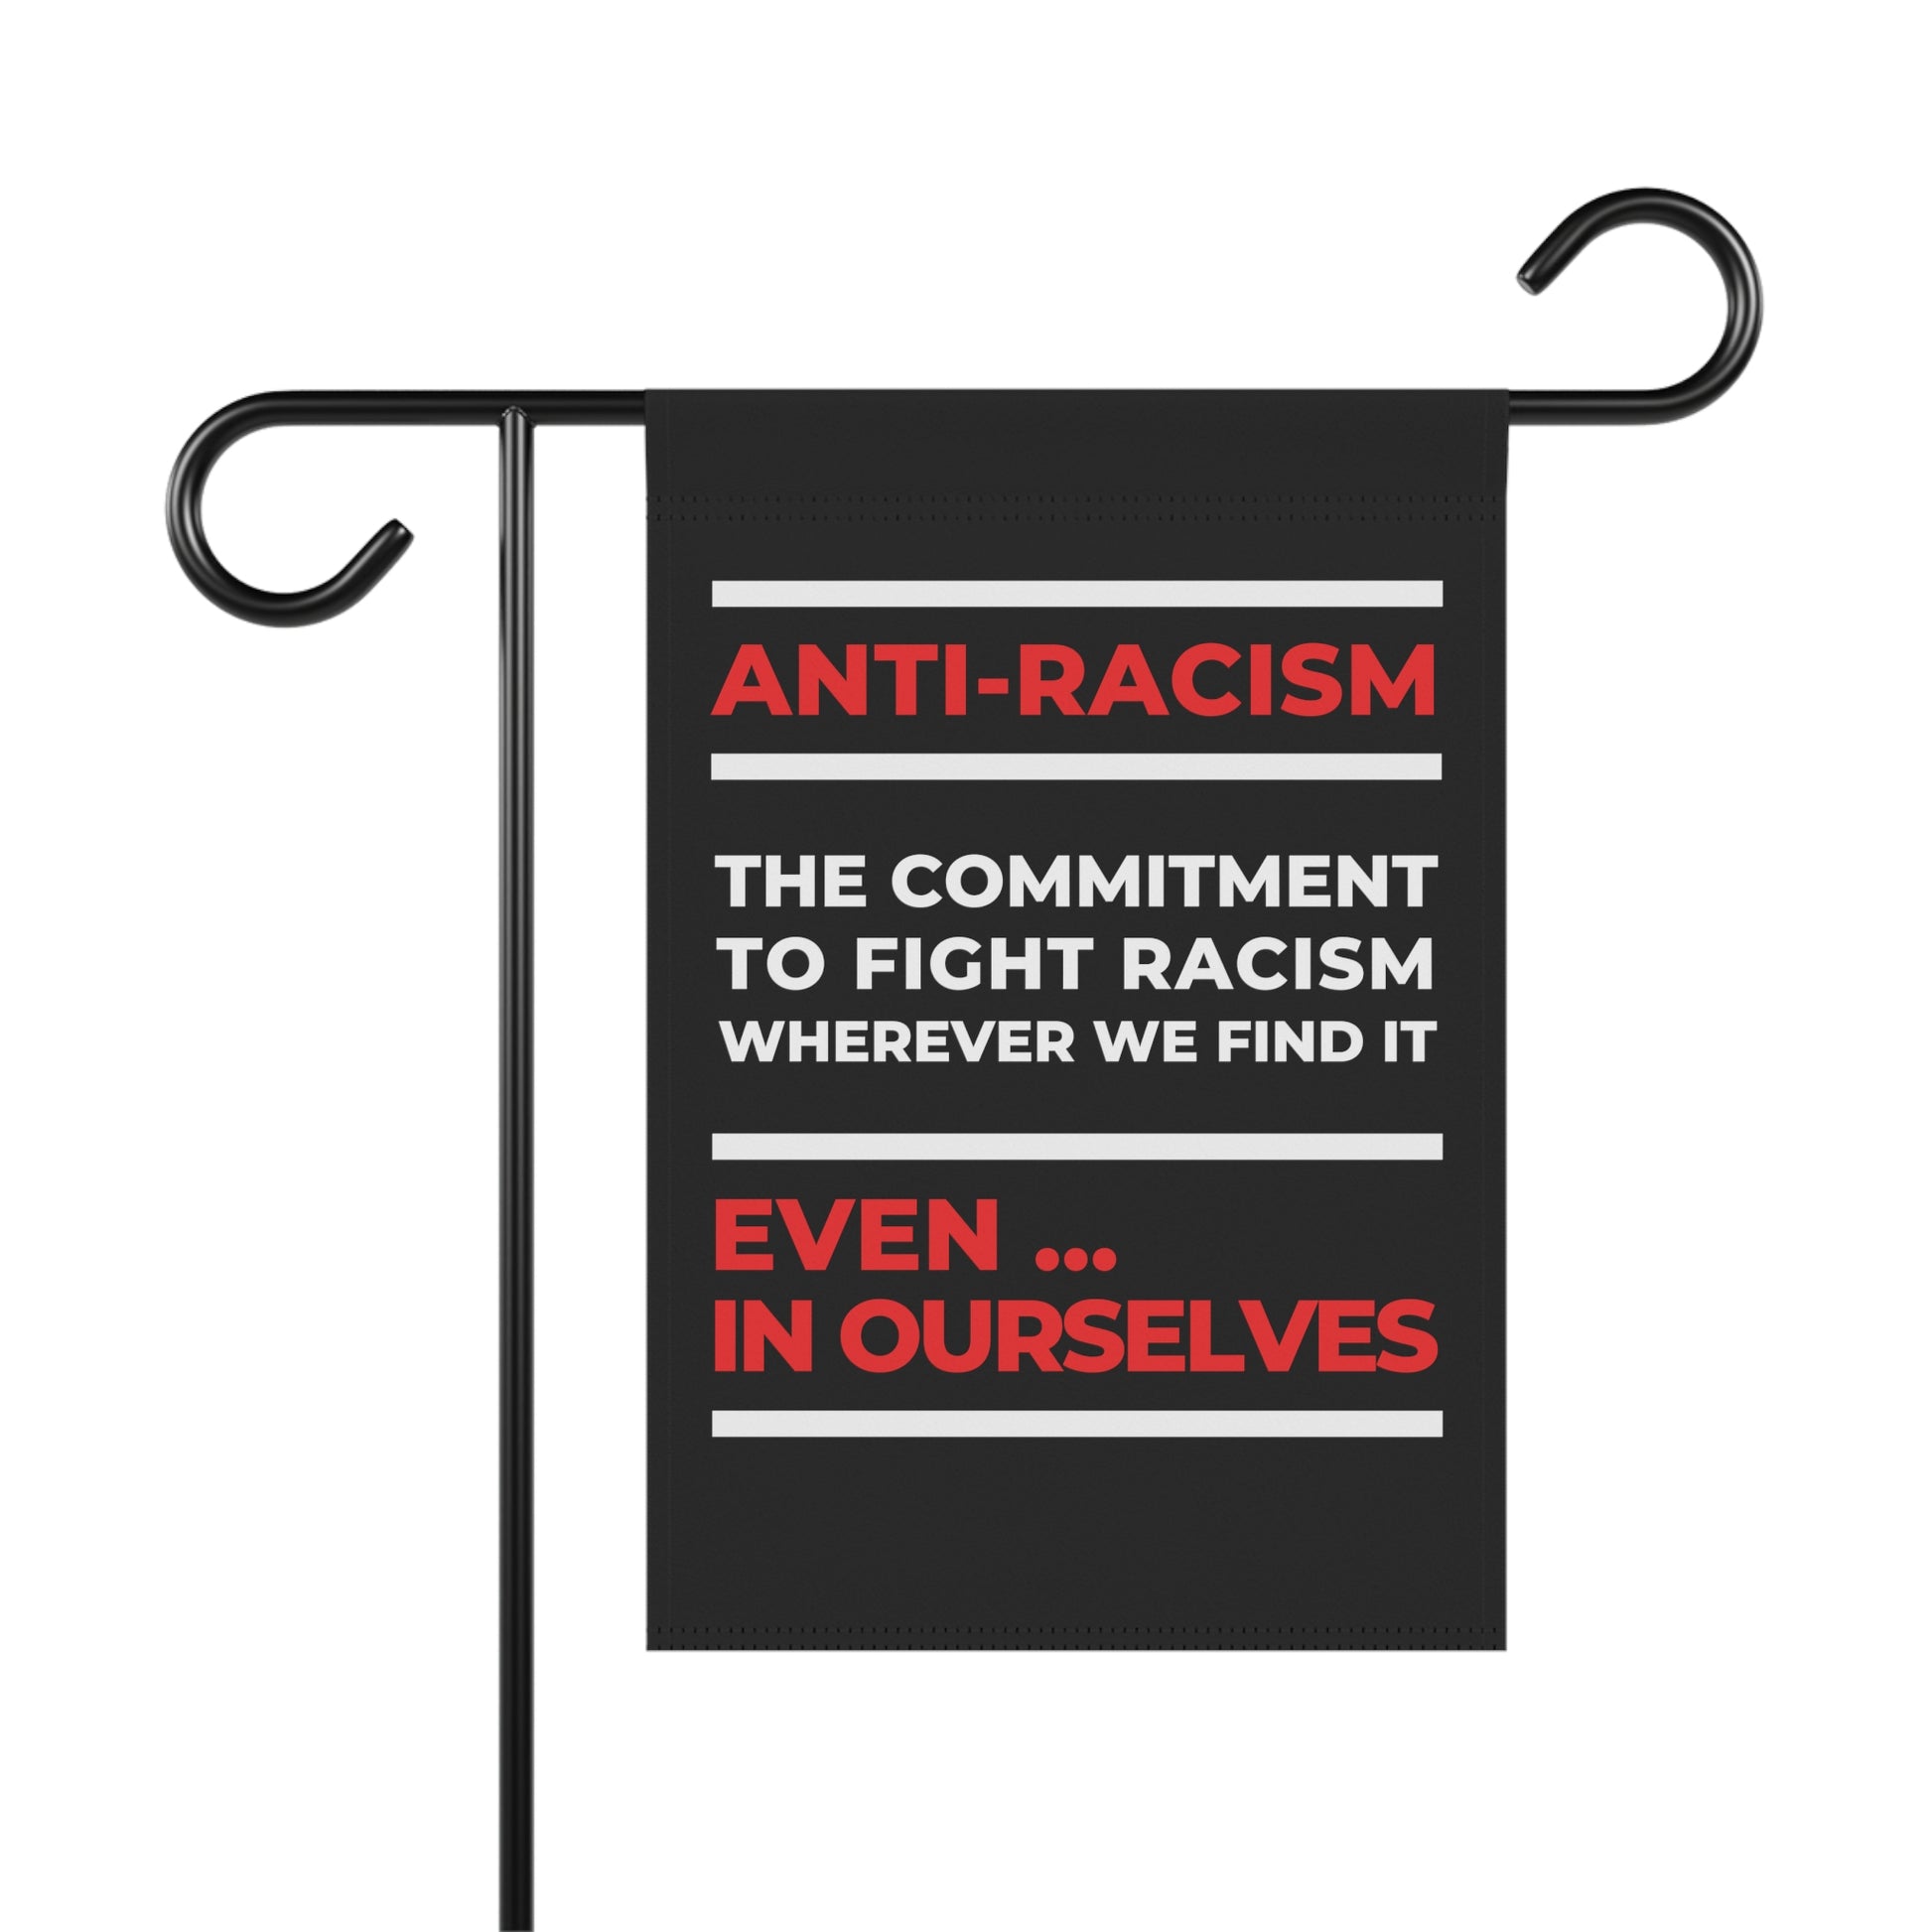 A powerful statement of solidarity, this garden flag encourages self-awareness and action against personal biases. Black anti-racism commitment yard flag with red and white design.